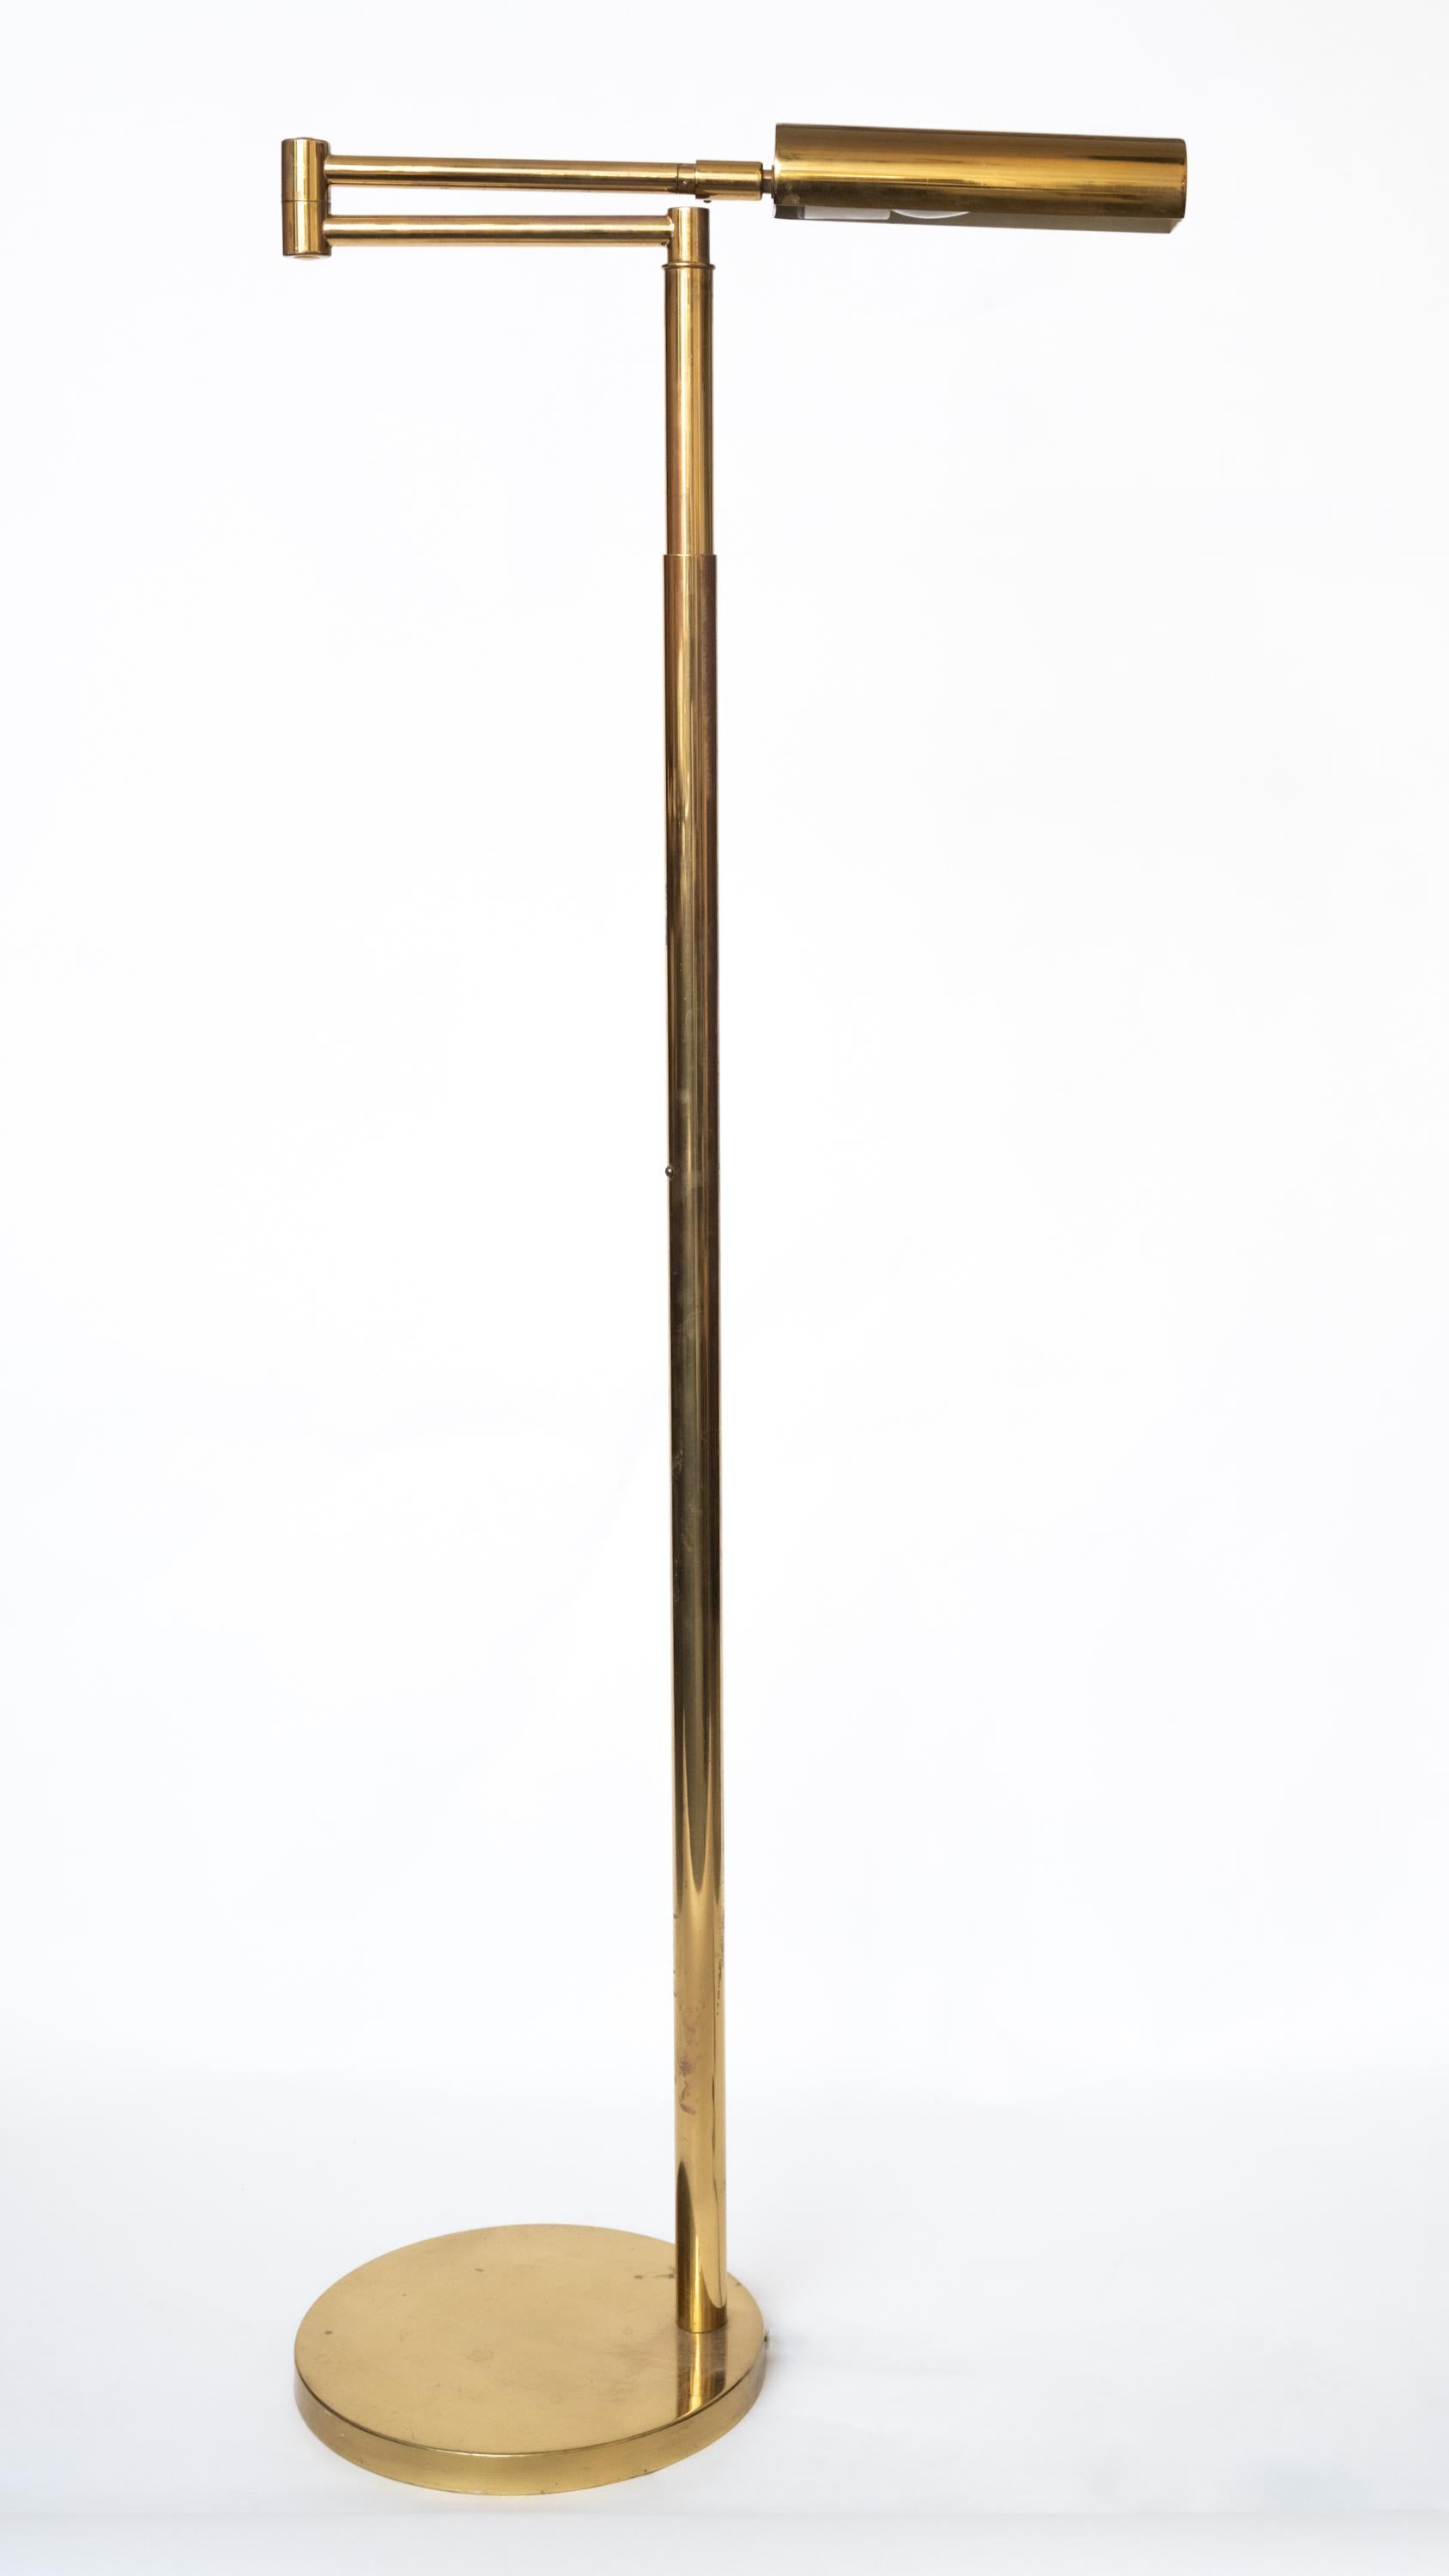 A Mid-Century Modern Brass Floor Lamp having an adjustable and extending arm. The stem sits asymmetrical on the circular base. Some marks and discoloration from age. Circa 1950s 

Longest Arm Length: 24